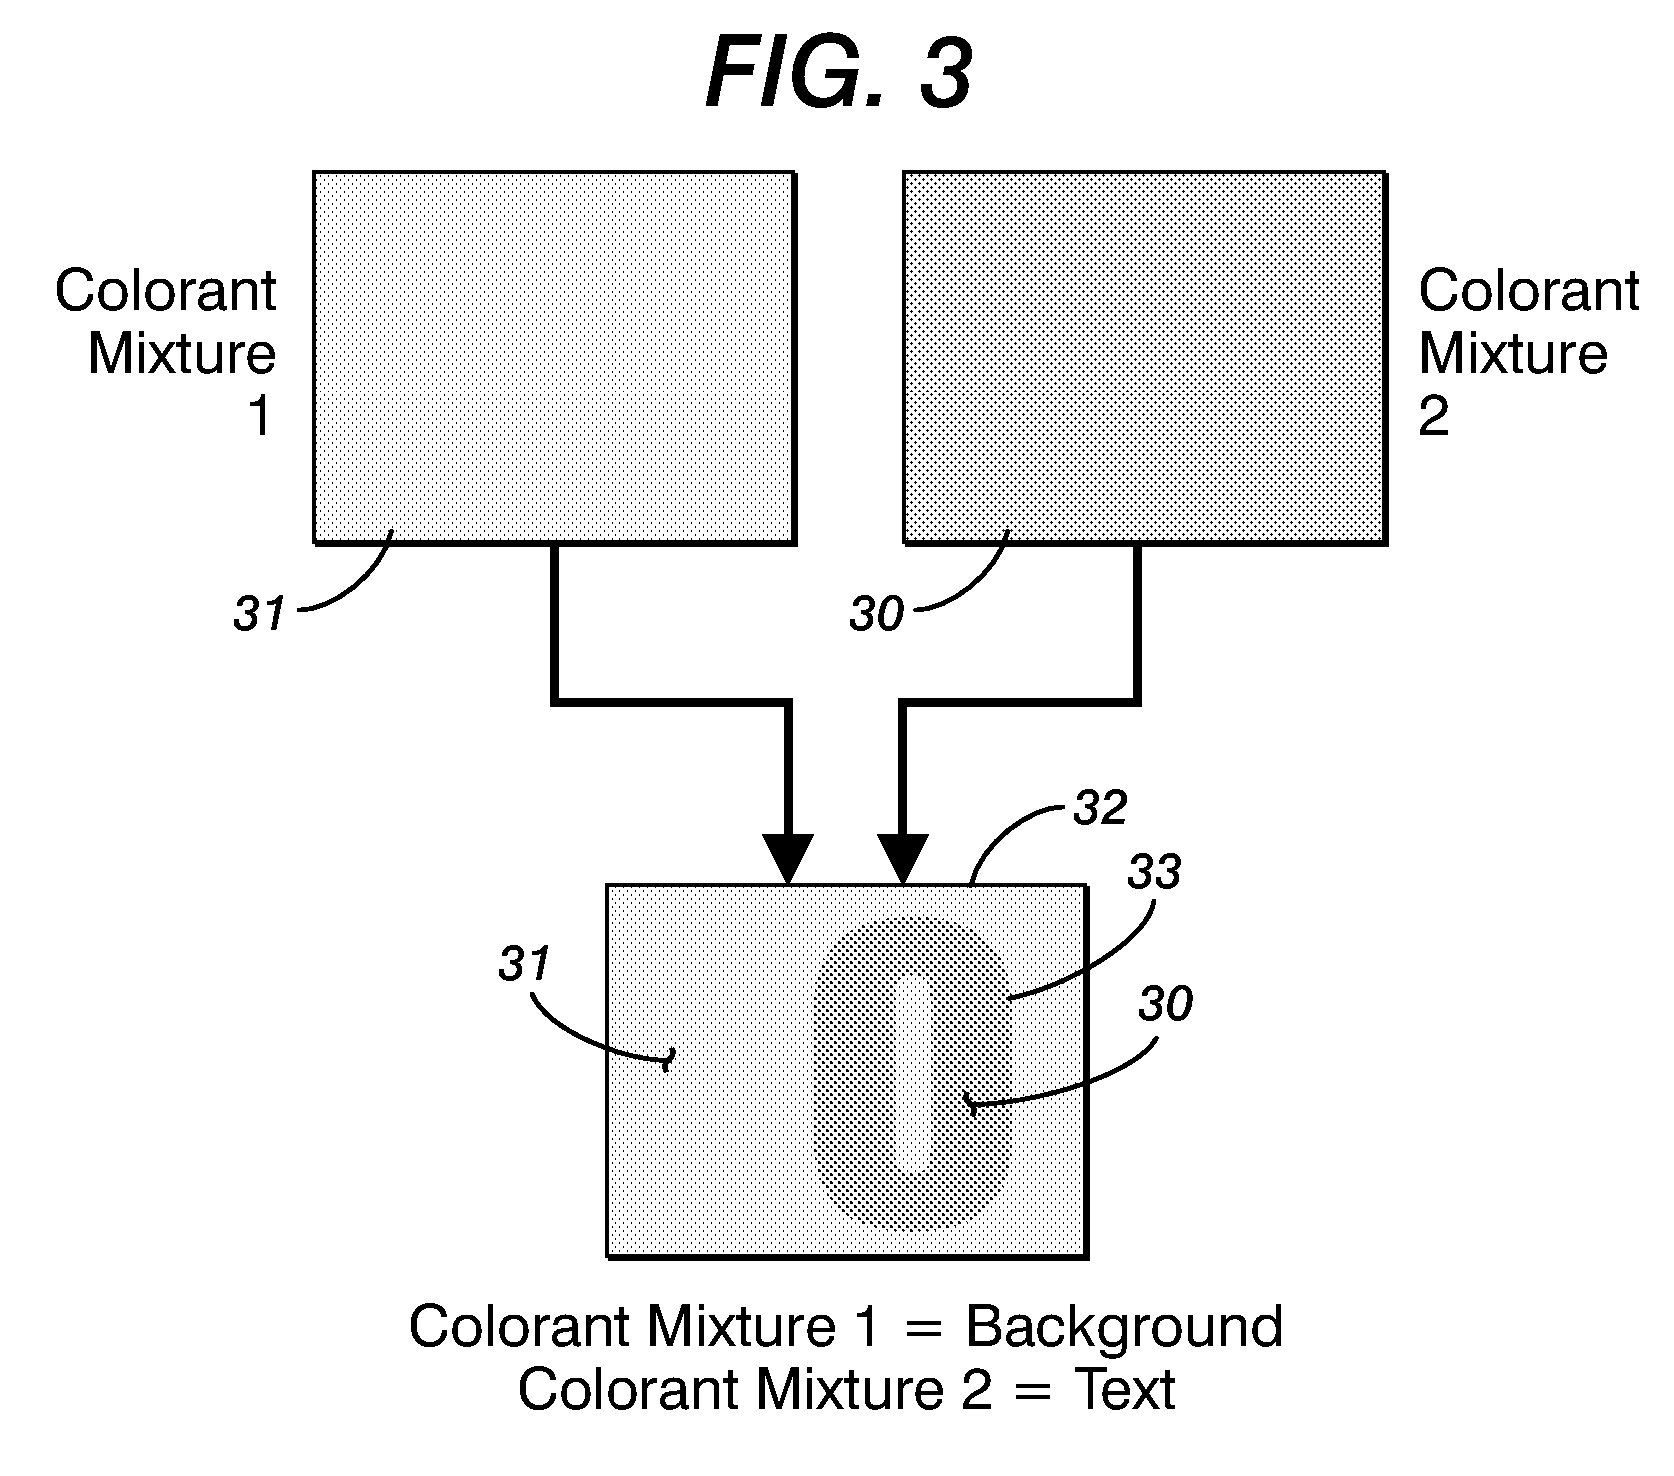 Substrate fluorescence pattern mask for embedding information in printed documents